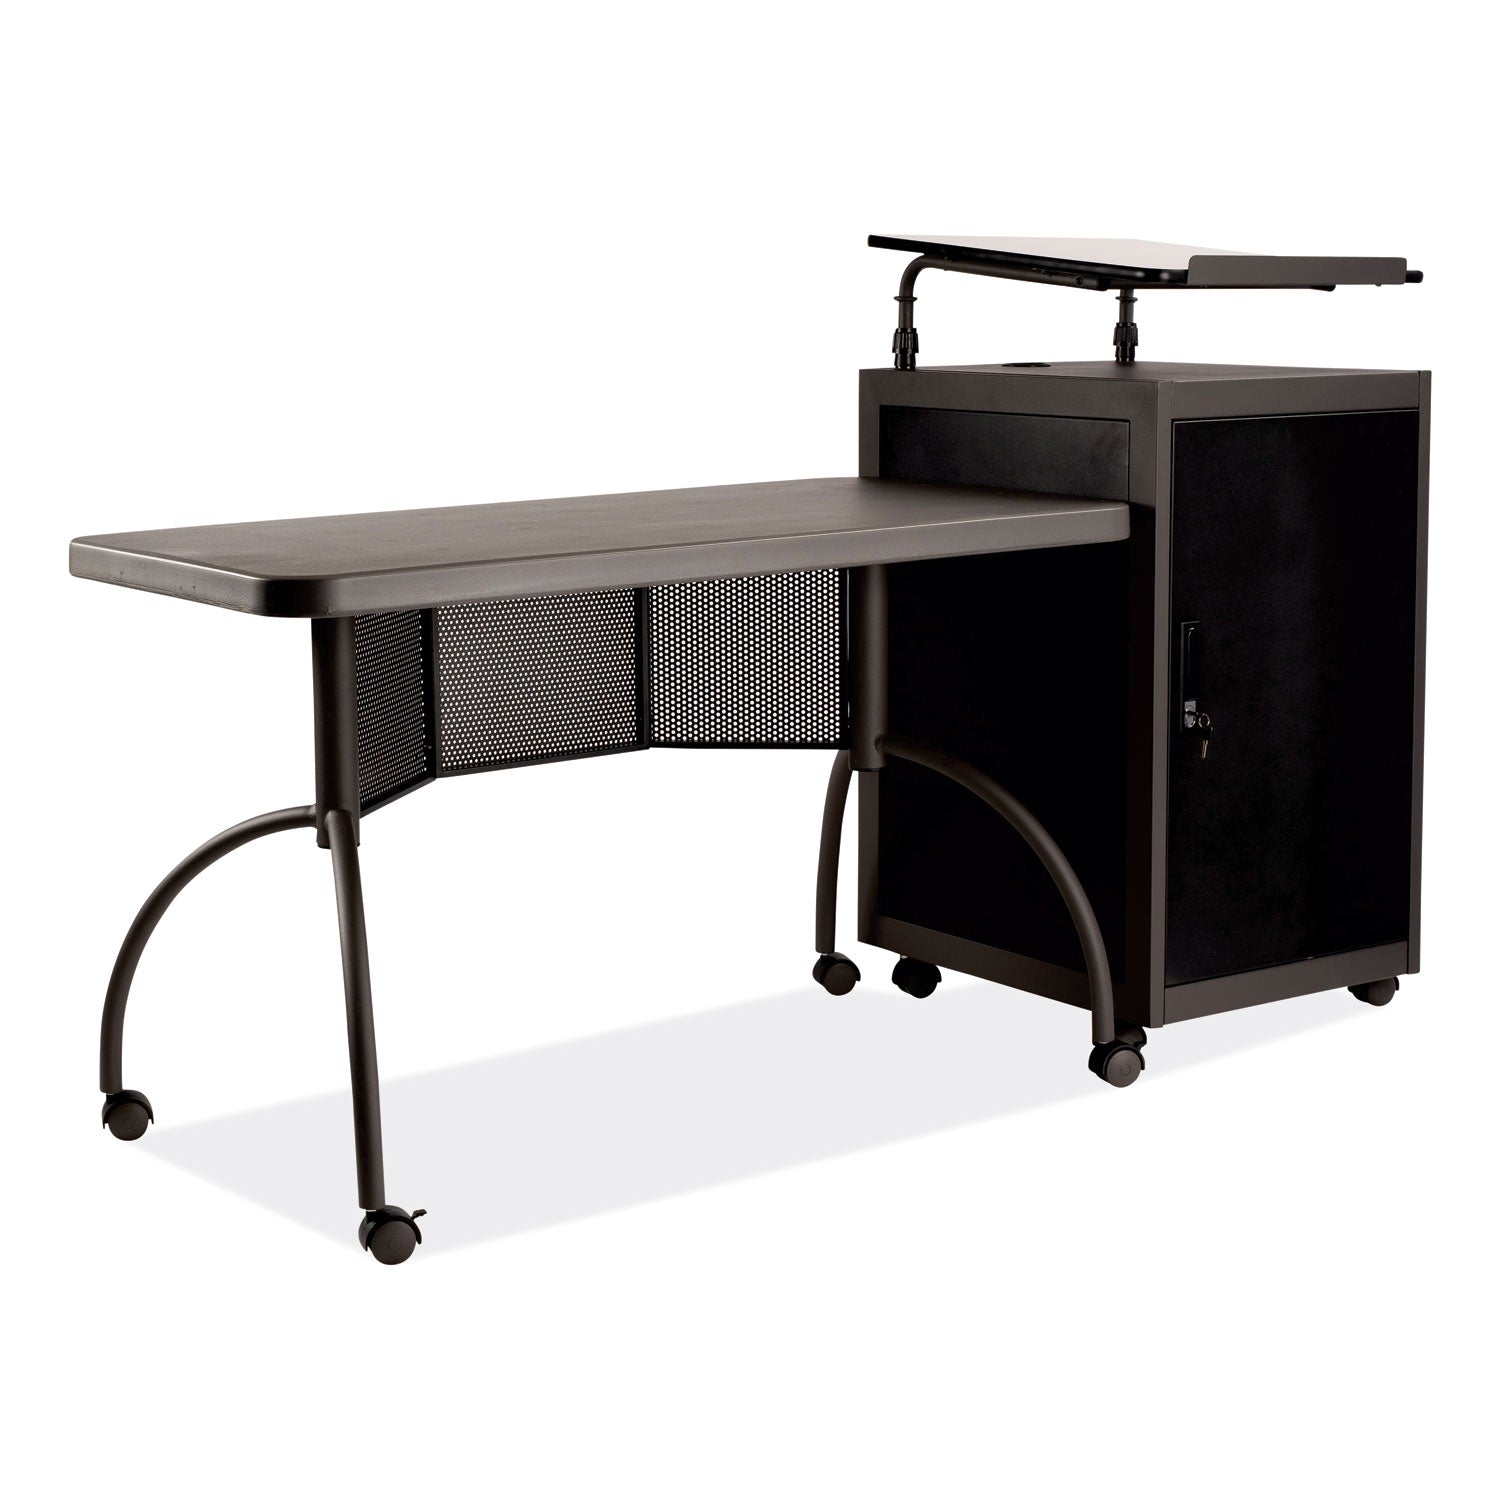 teachers-workpod-desk-and-lectern-kit-68-x-24-x-41-charcoal-gray-ships-in-1-3-business-days_npstwp - 1